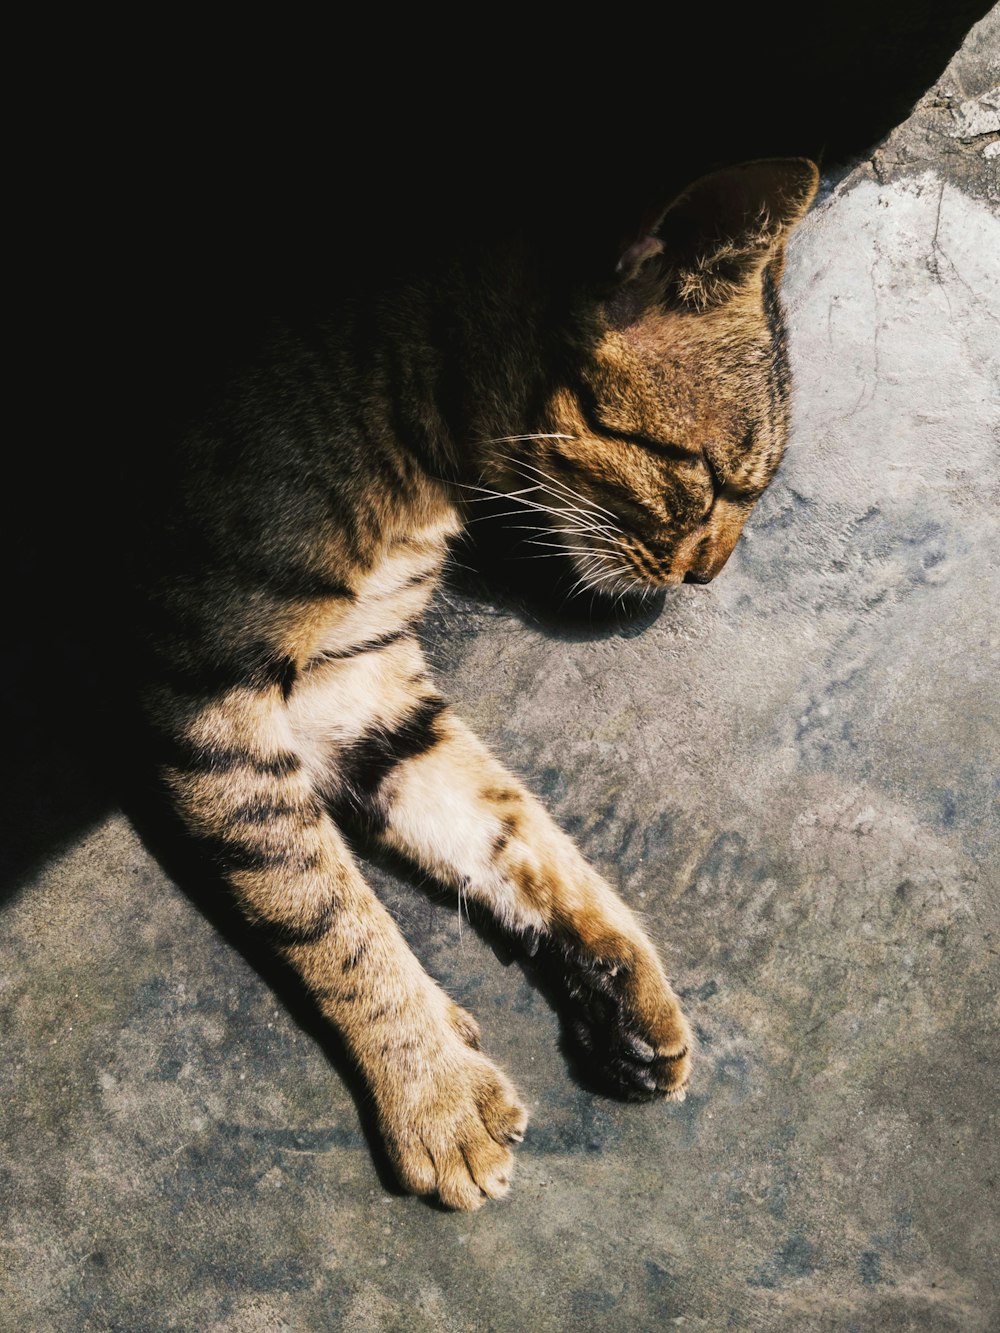 silver tabby cat lying on concrete surface